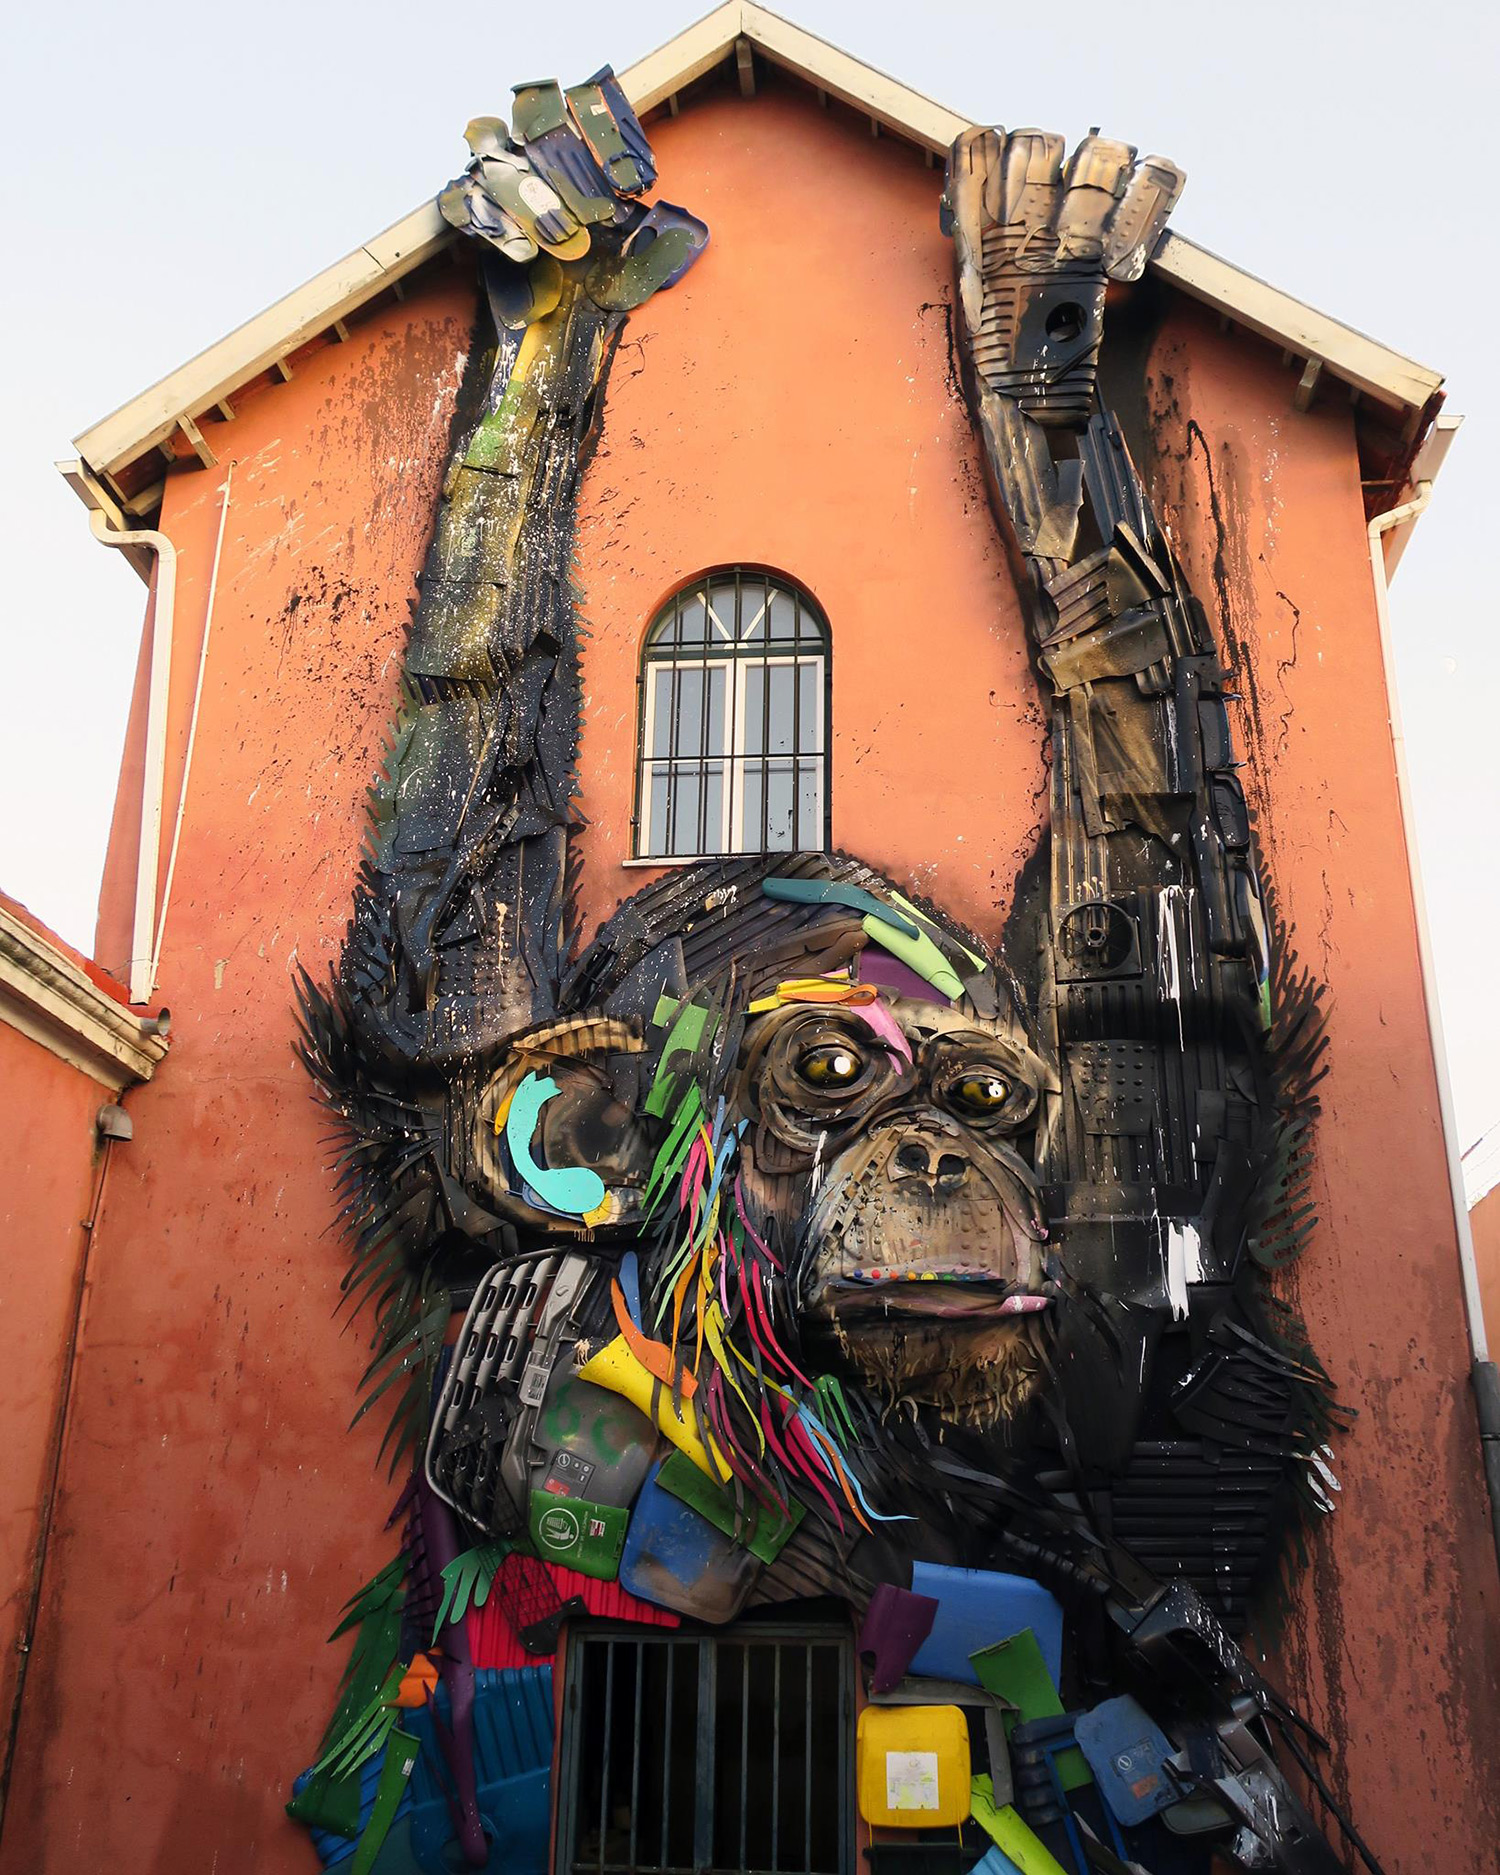 Outdoor wall art that looks like monkey climbing up that building